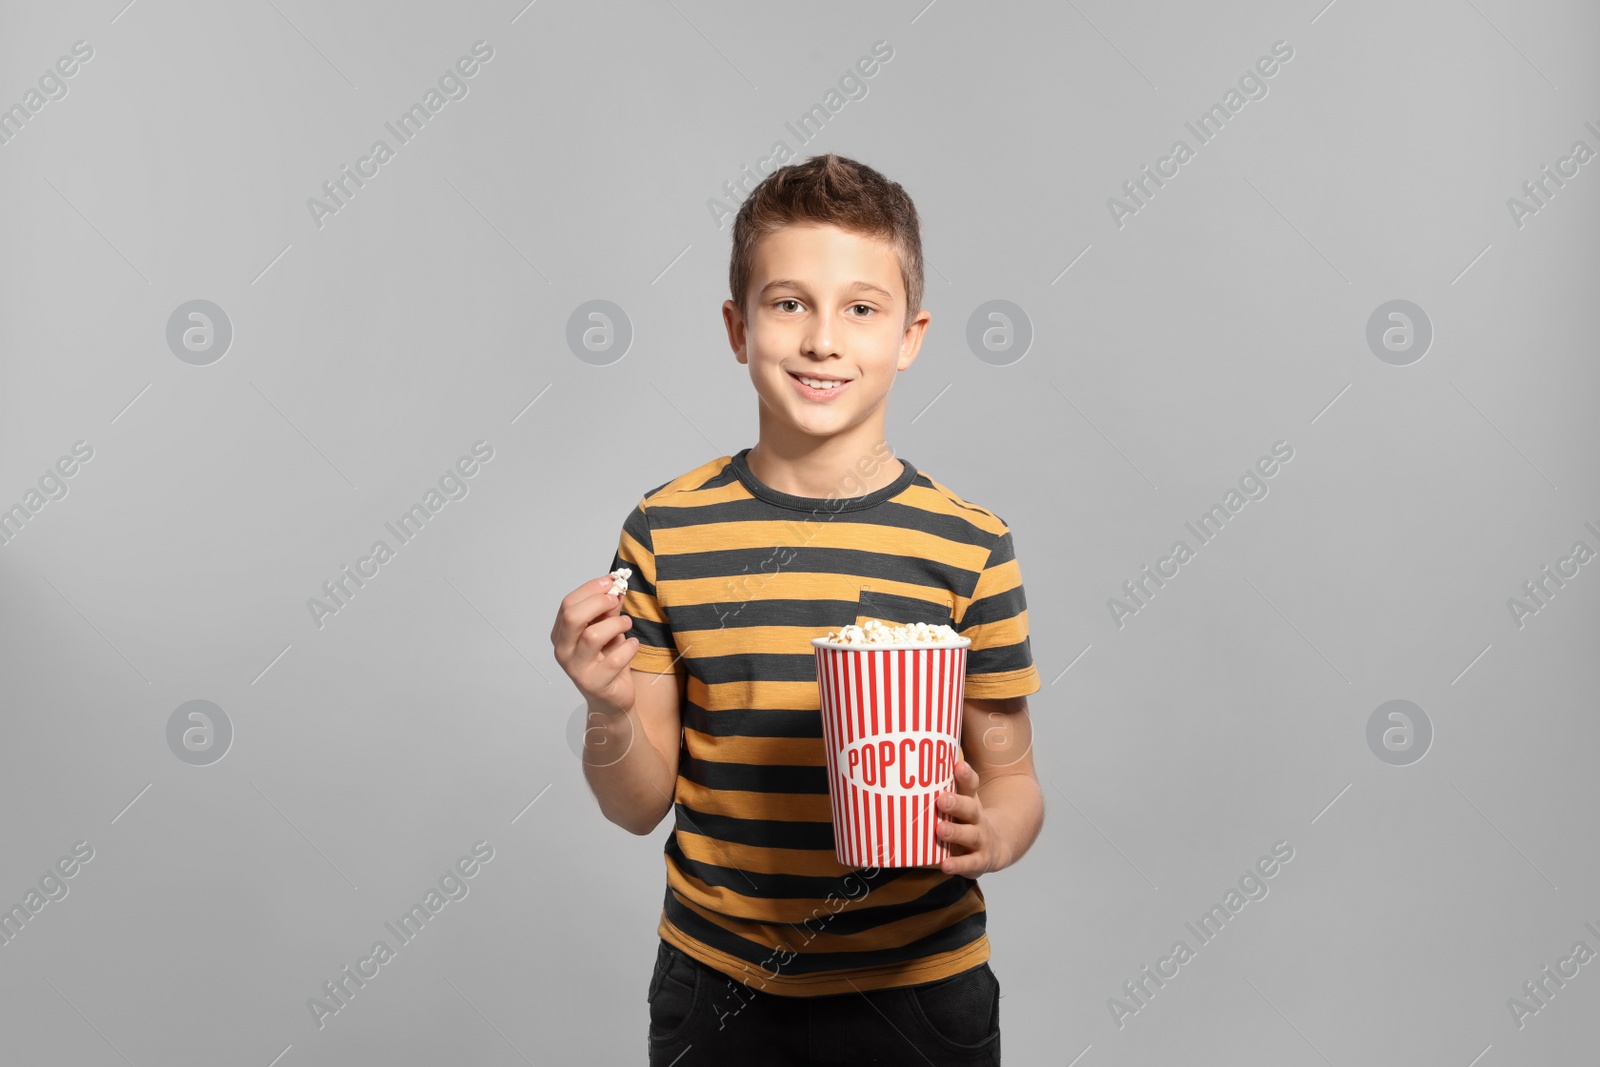 Photo of Boy with popcorn during cinema show on grey background